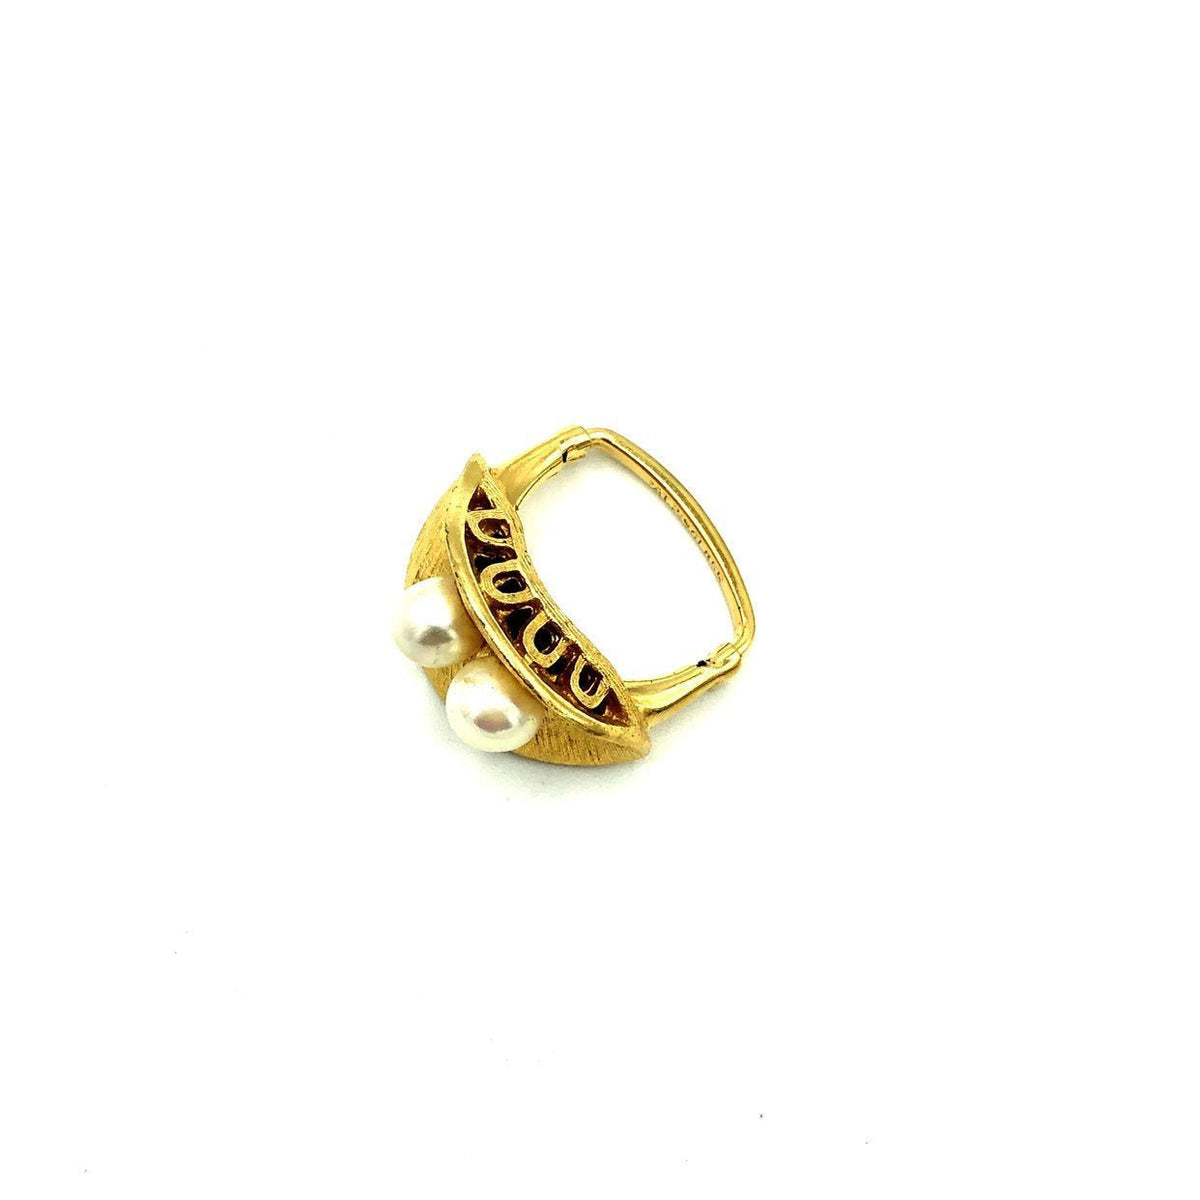 Gold Vendome Culture Pearl Vintage Cocktail Ring - 24 Wishes Vintage Jewelry